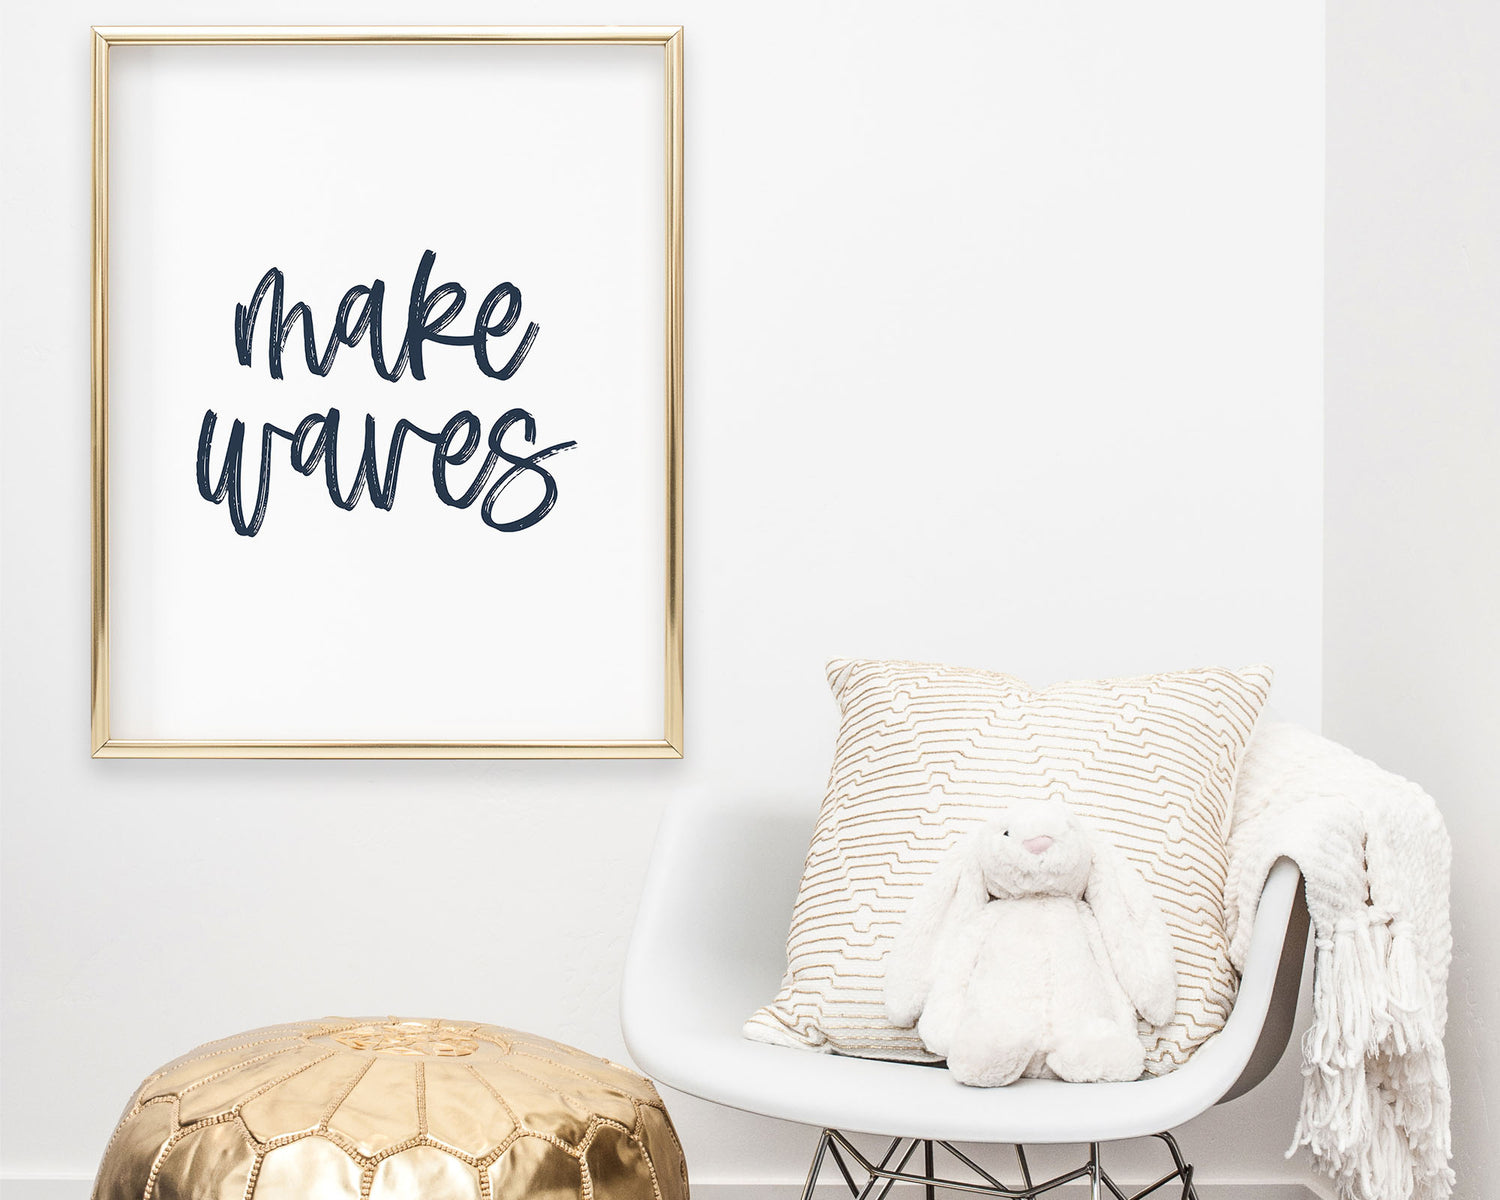 Navy Blue Make Waves Printable Wall Art featuring a textured brush style cursive lettered quote perfect for Baby Boy Nautical Nursery Decor, Baby Girl Surf Nursery Wall Art, Nautical Kids Bedroom Decor or Children's Coastal Bathroom Wall Art.